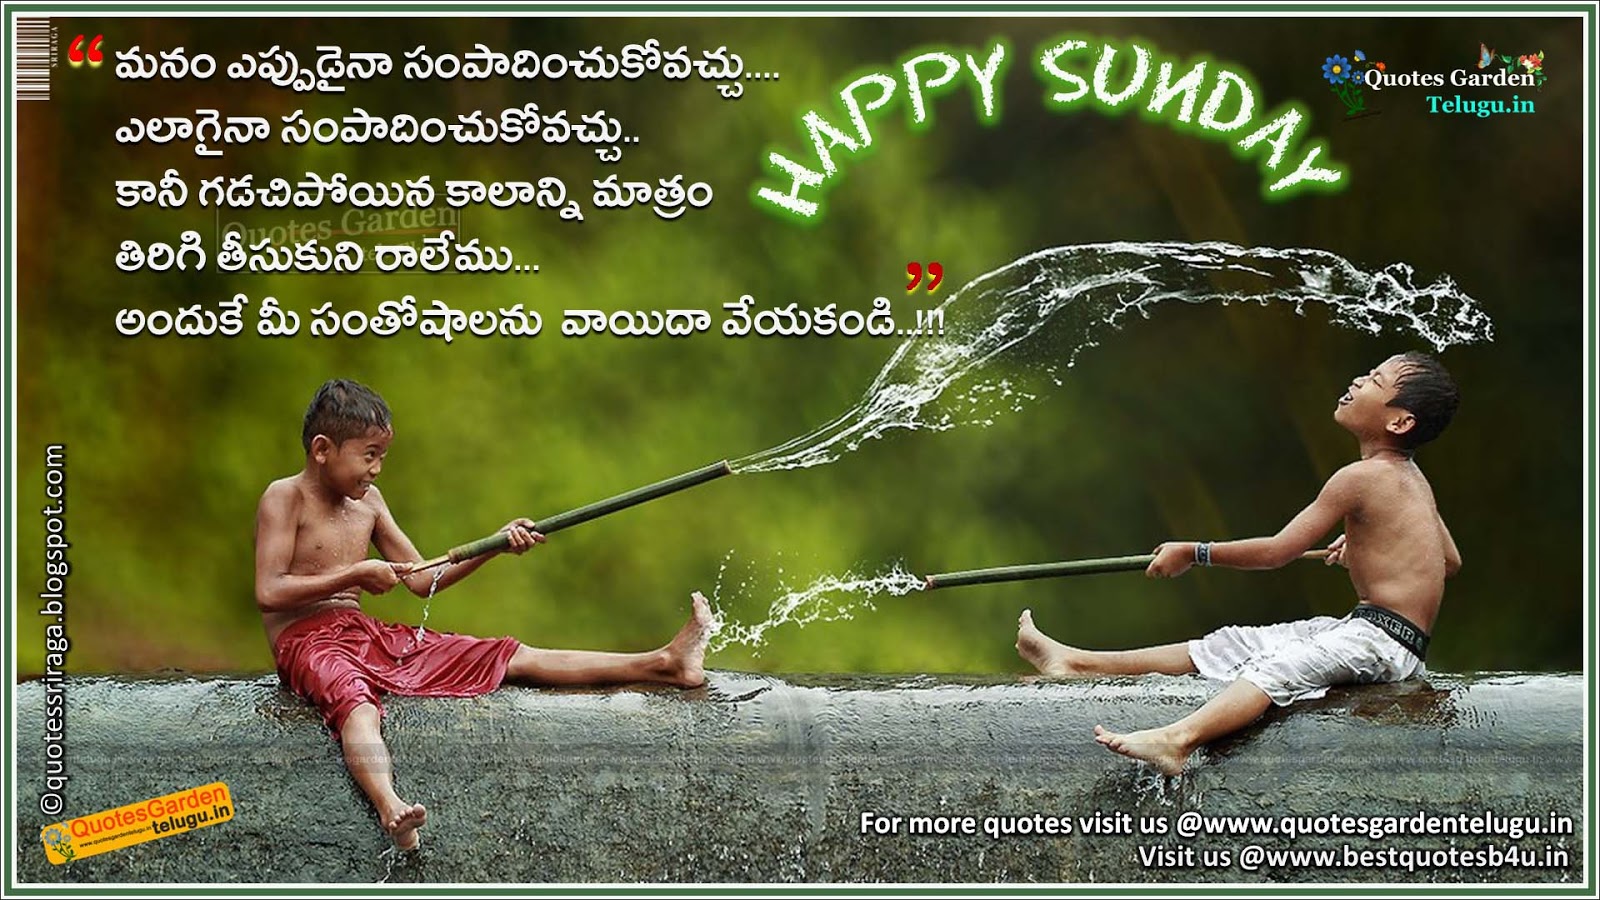 happiness telugu quotes with happy sunday greetings | QUOTES GARDEN TELUGU  | Telugu Quotes | English Quotes | Hindi Quotes |